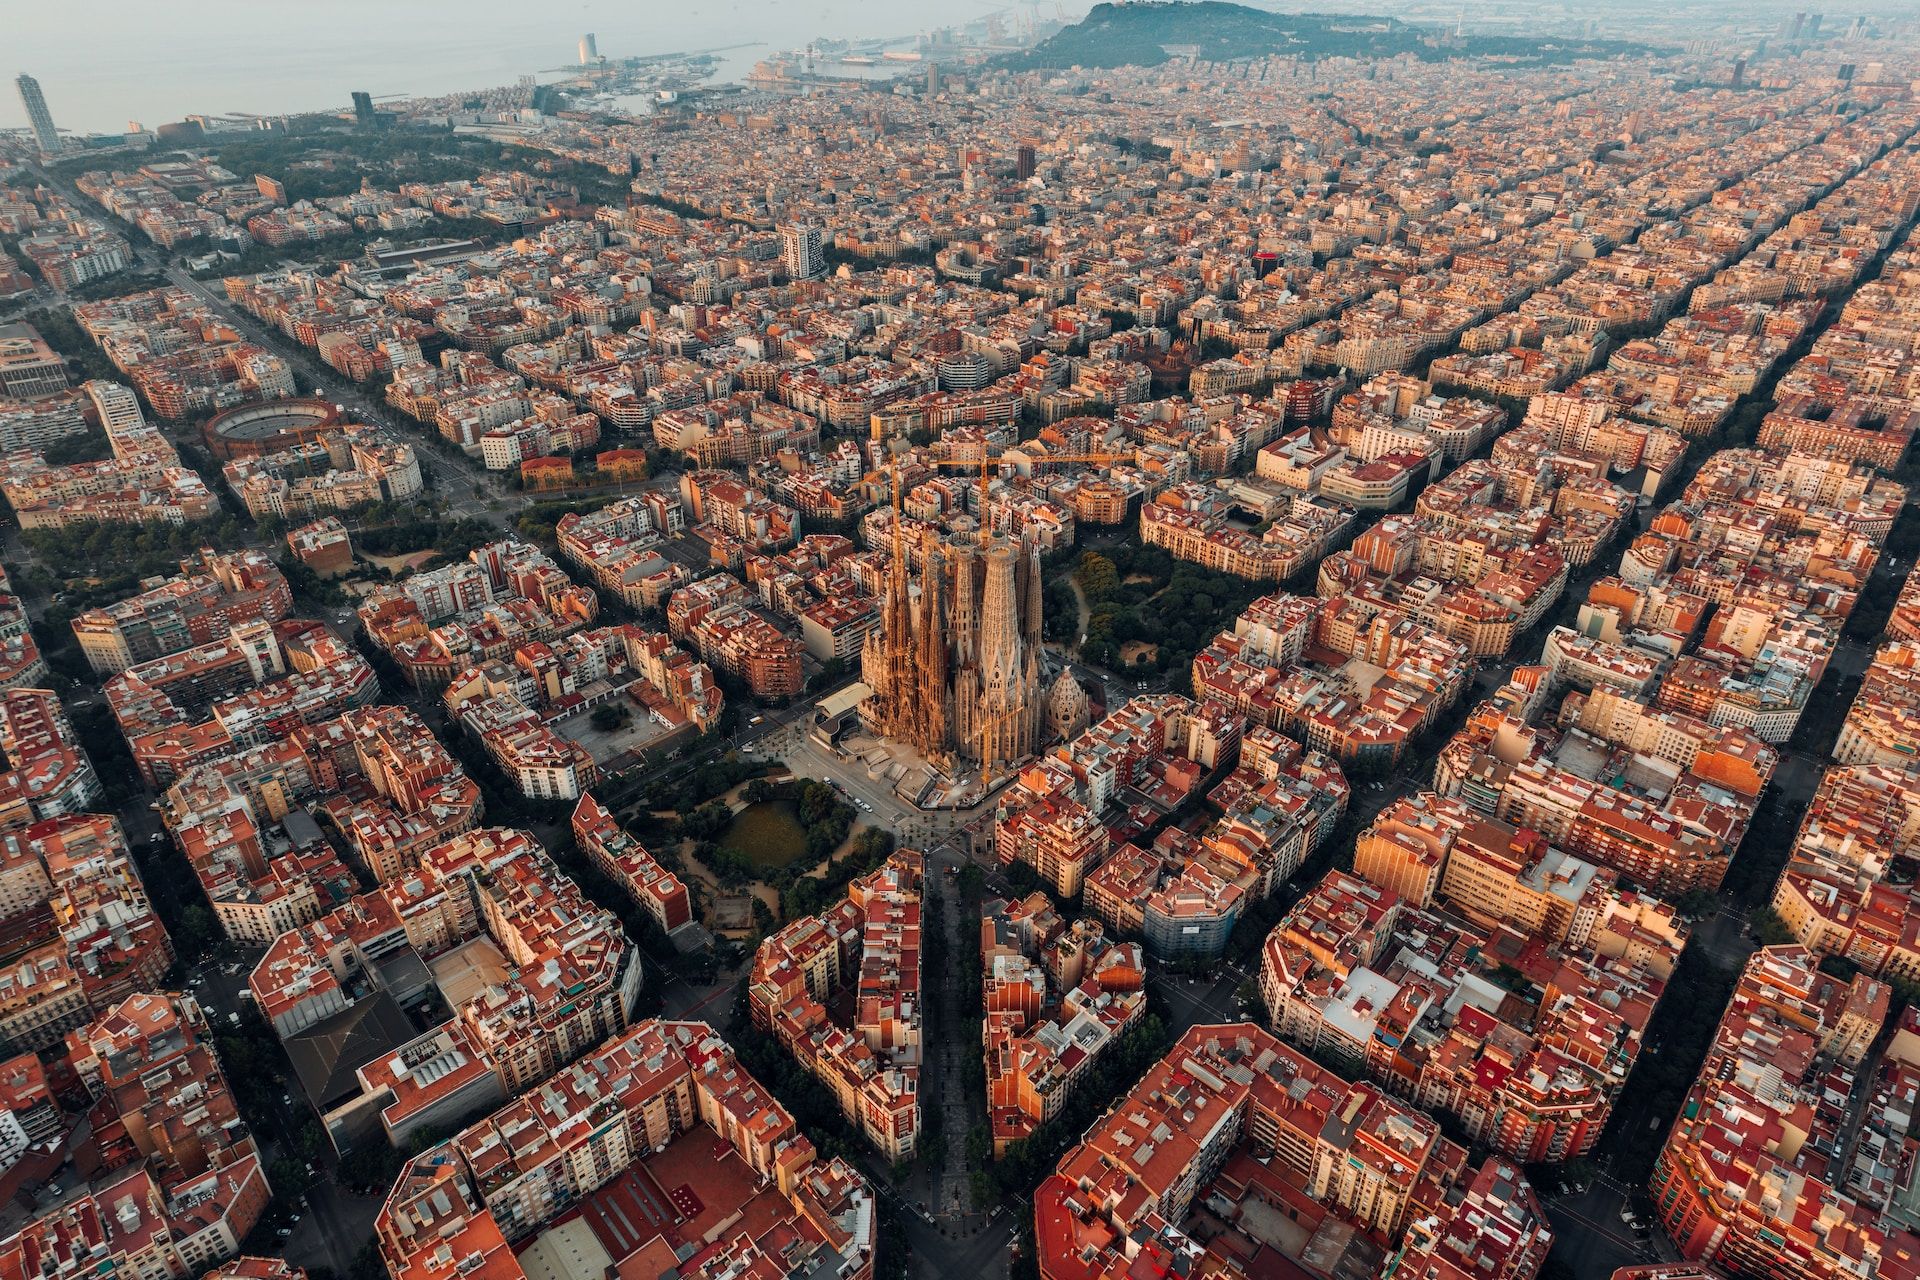 Barcelona offers a beautiful architectural marvels